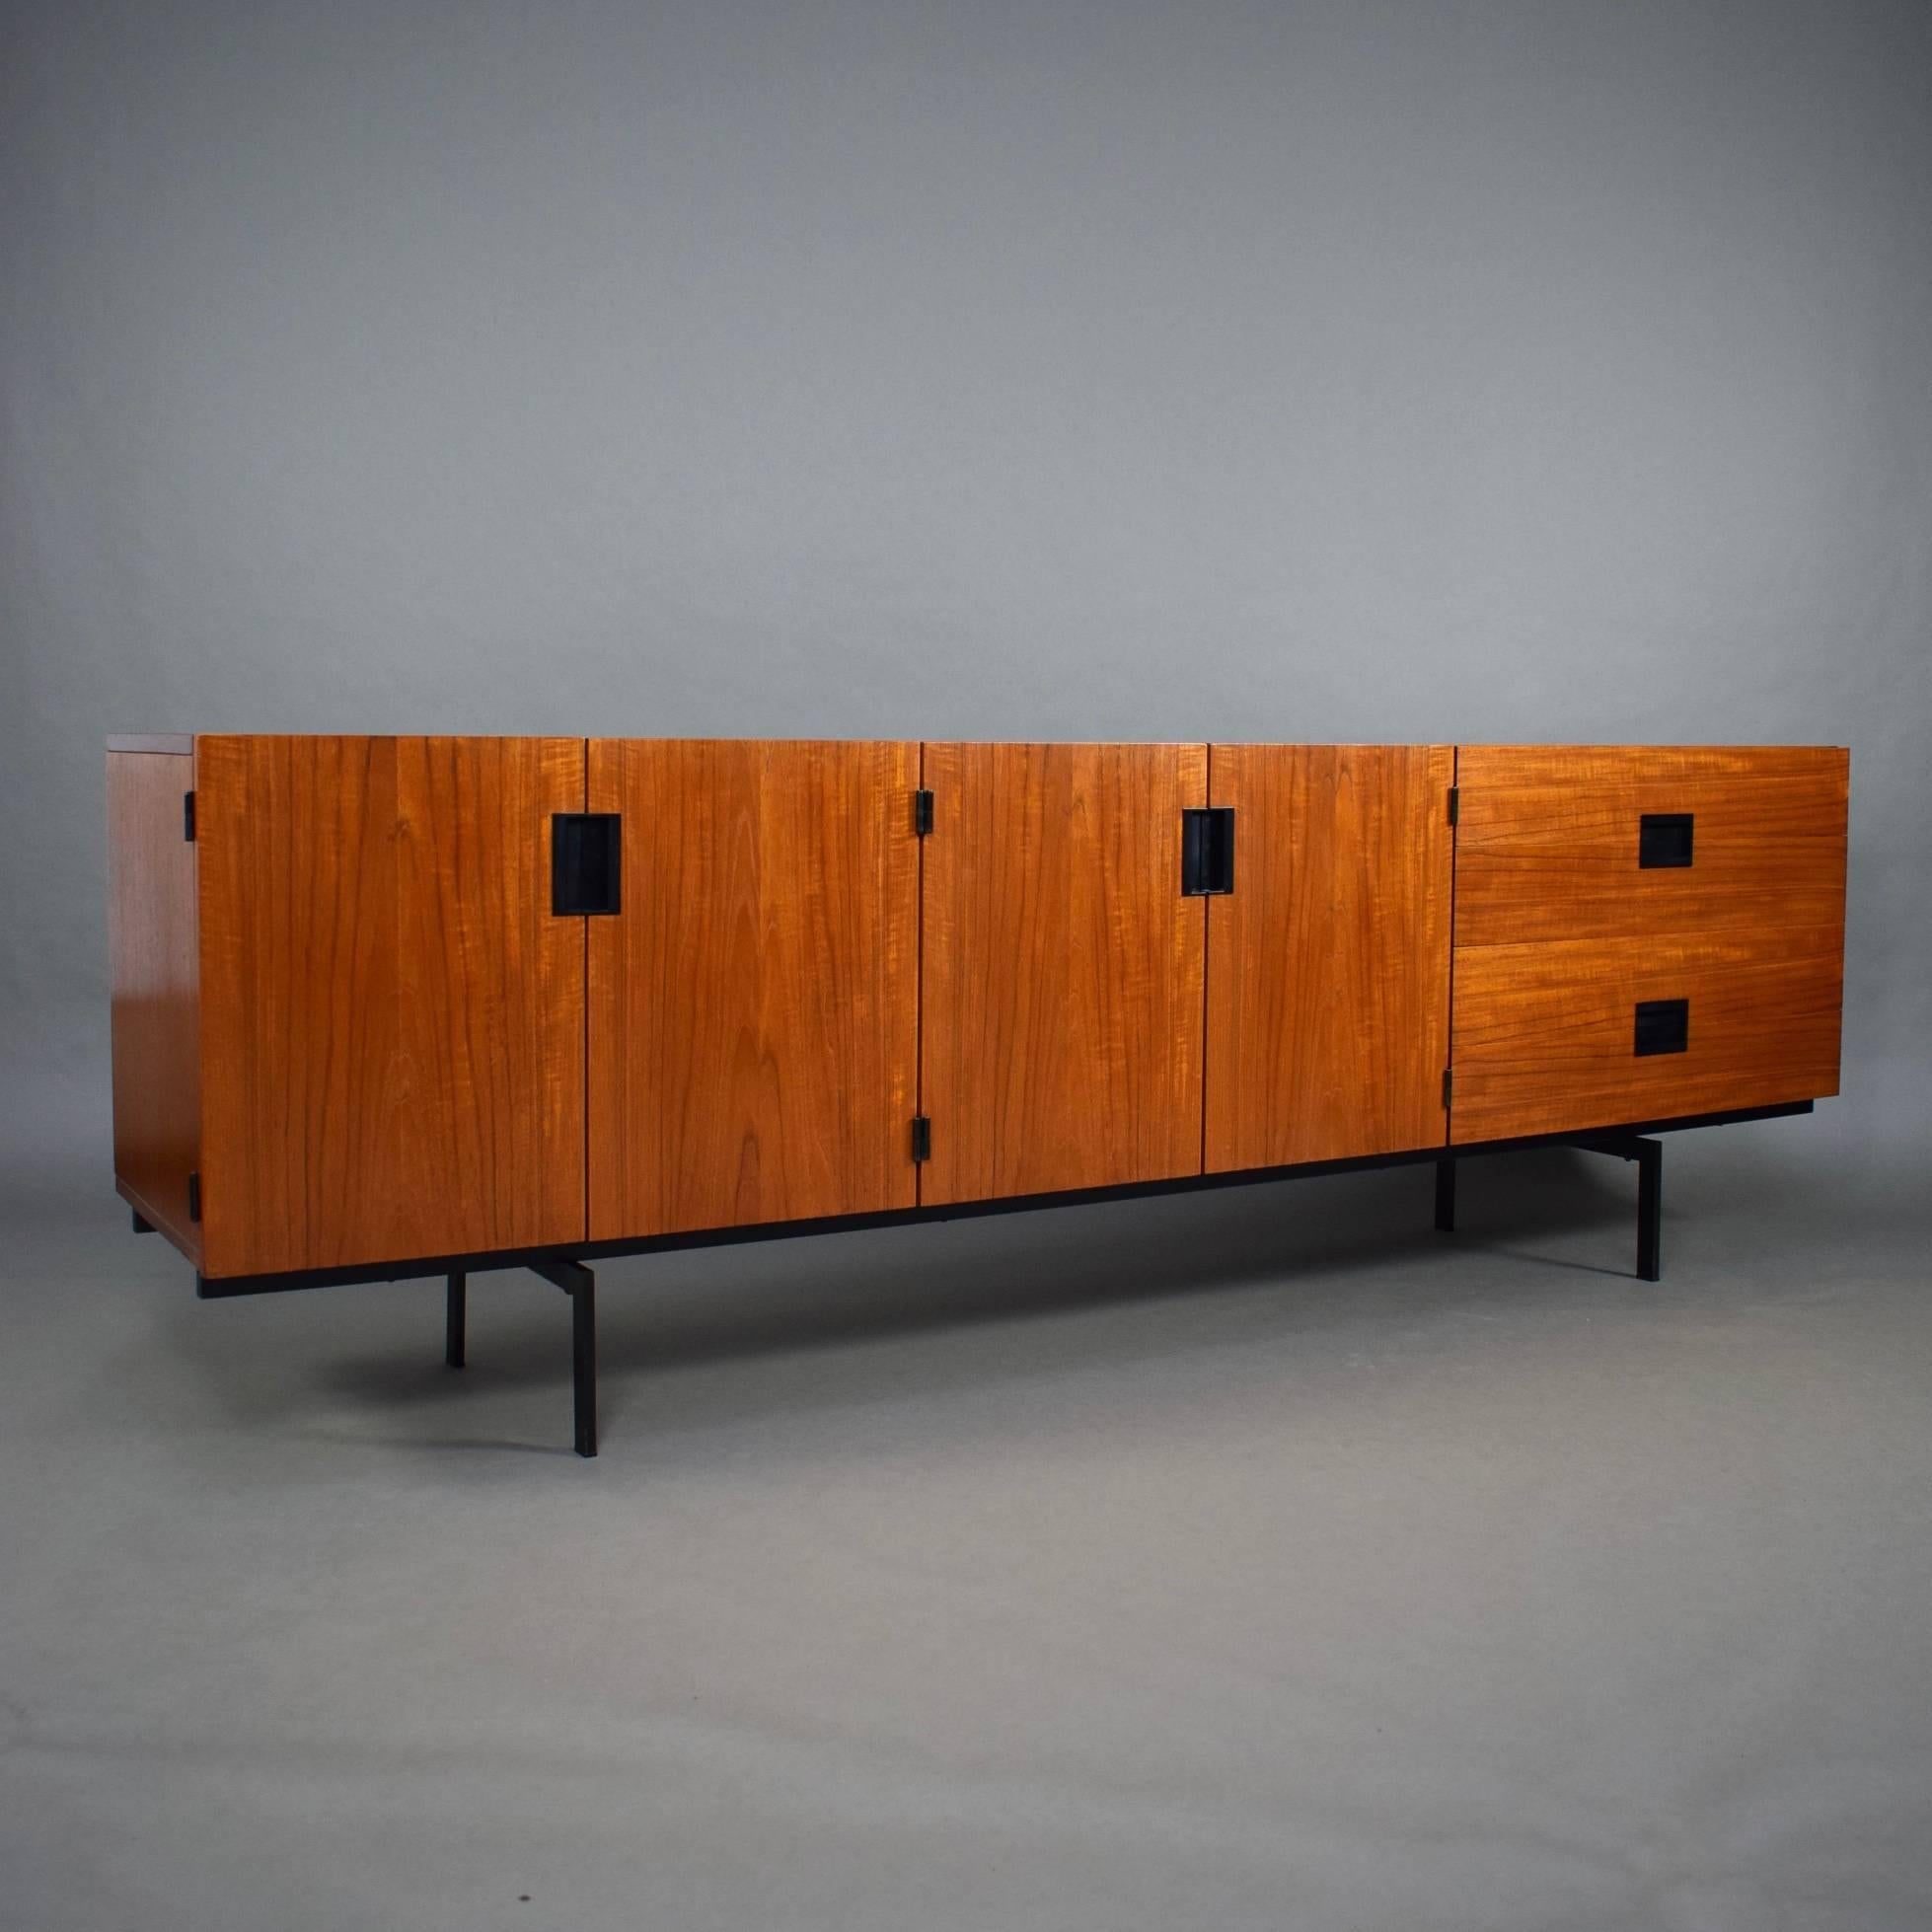 Iconic DU-03 ‘Japanese Series’ sideboard designed by the famous Dutch designer Cees Braakman for UMS Pastoe. This sideboard is minimalistic and timeless in design and still as iconic as it is beautiful. The typical Braakman drawers are made of bent